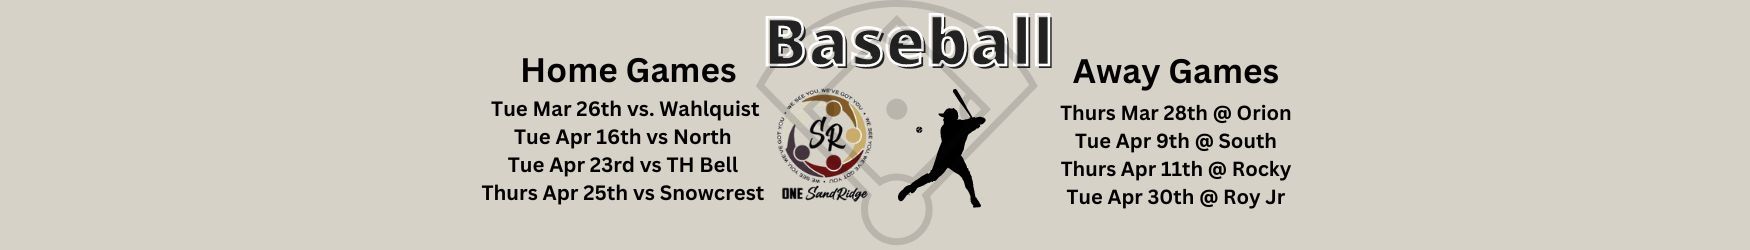 Baseball Games Click Link for Standings & Schedule